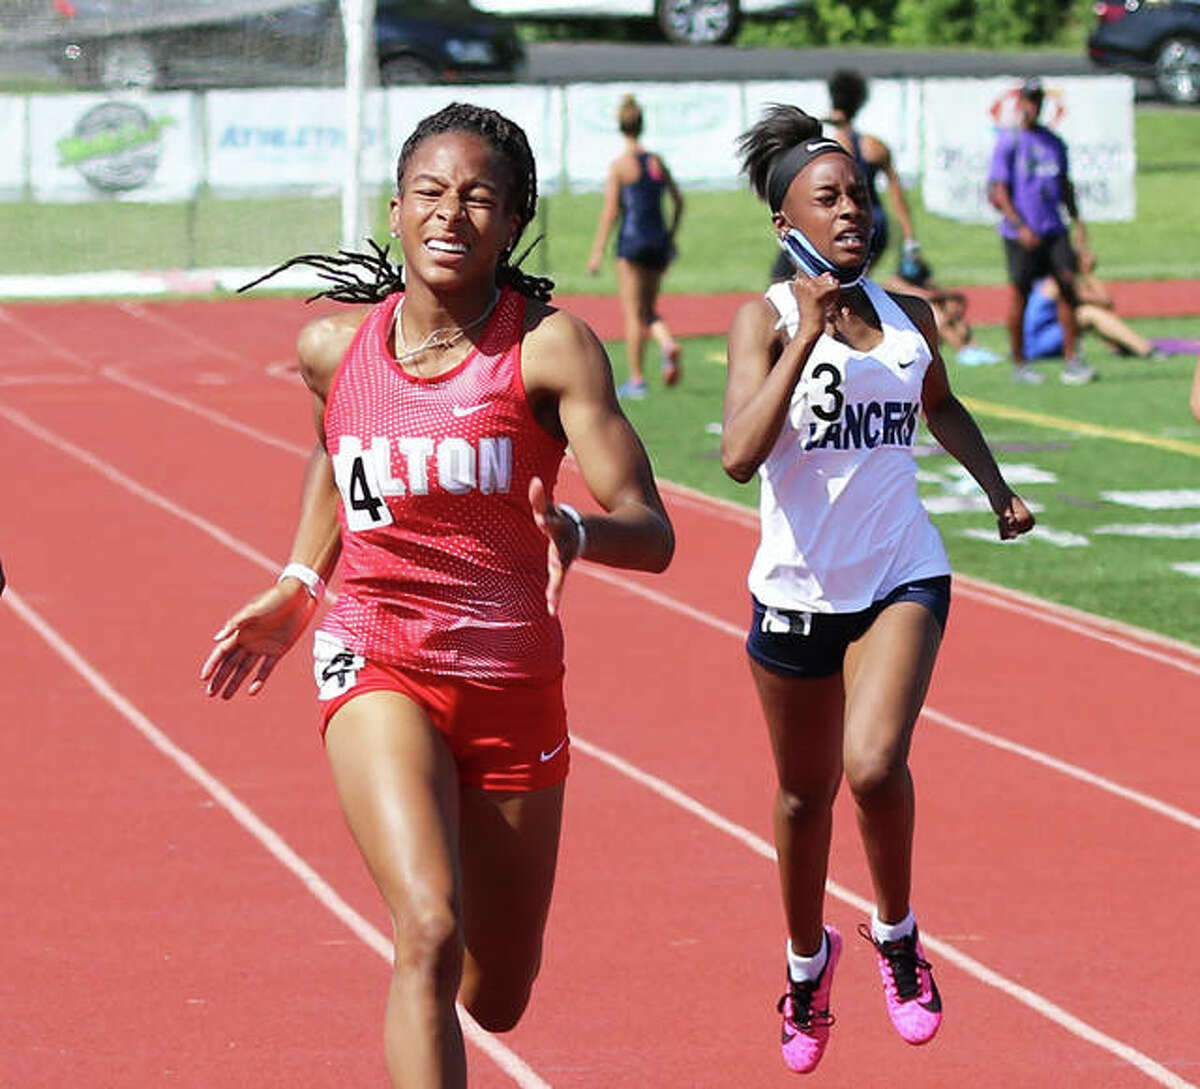 Alton junior Renee Raglin (left) wins the 200 meters to complete sprints sweep after winning the 100 at the SWC Meet on May 26 at Collinsville. Raglin is the 2021 Telegraph Large-Schools Girls Track Athlete of the Year.